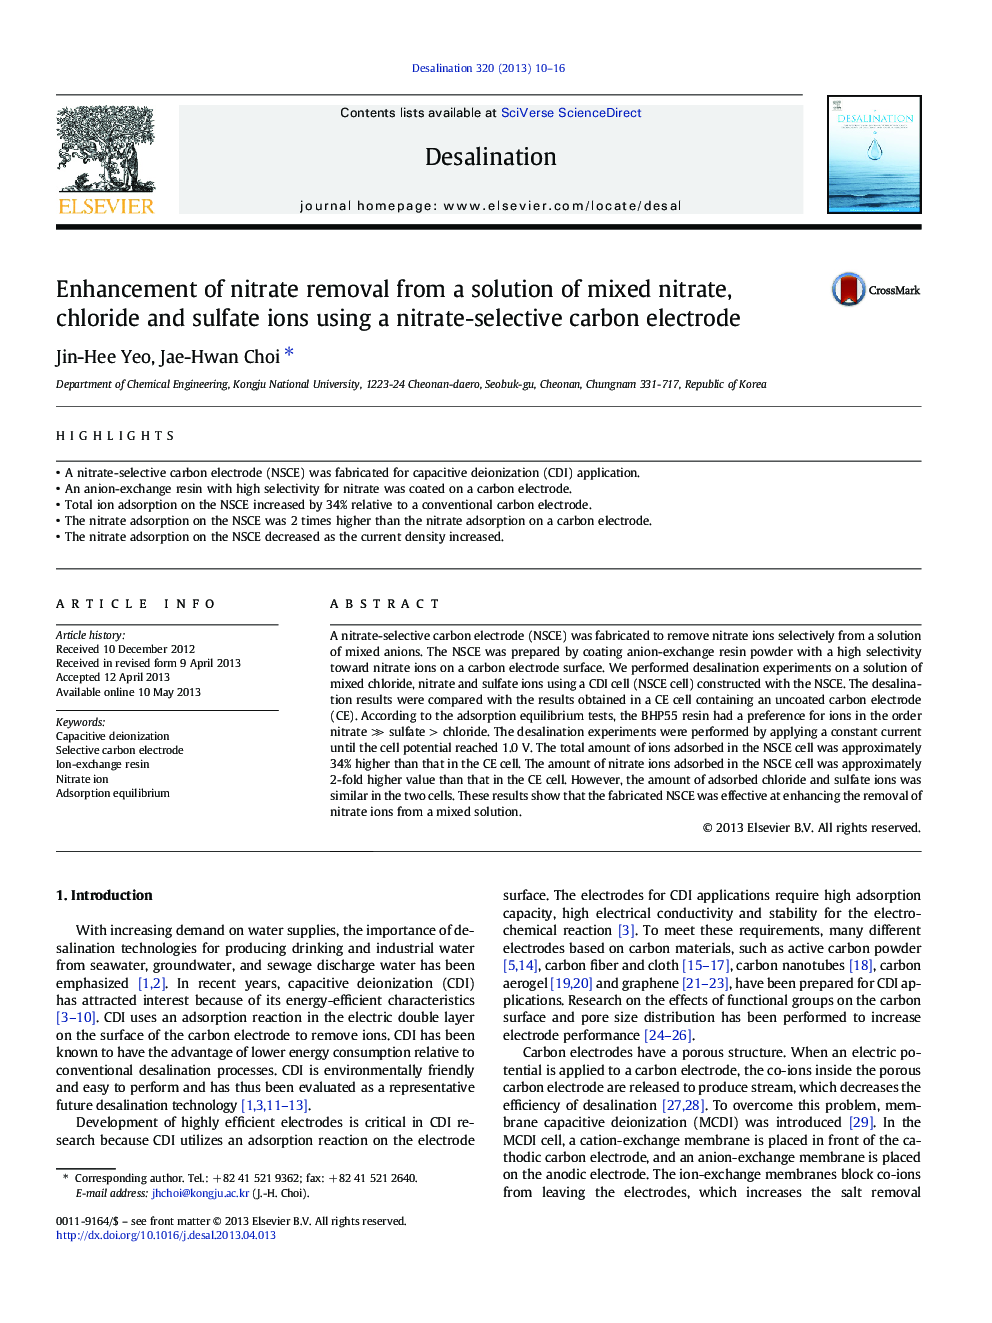 Enhancement of nitrate removal from a solution of mixed nitrate, chloride and sulfate ions using a nitrate-selective carbon electrode